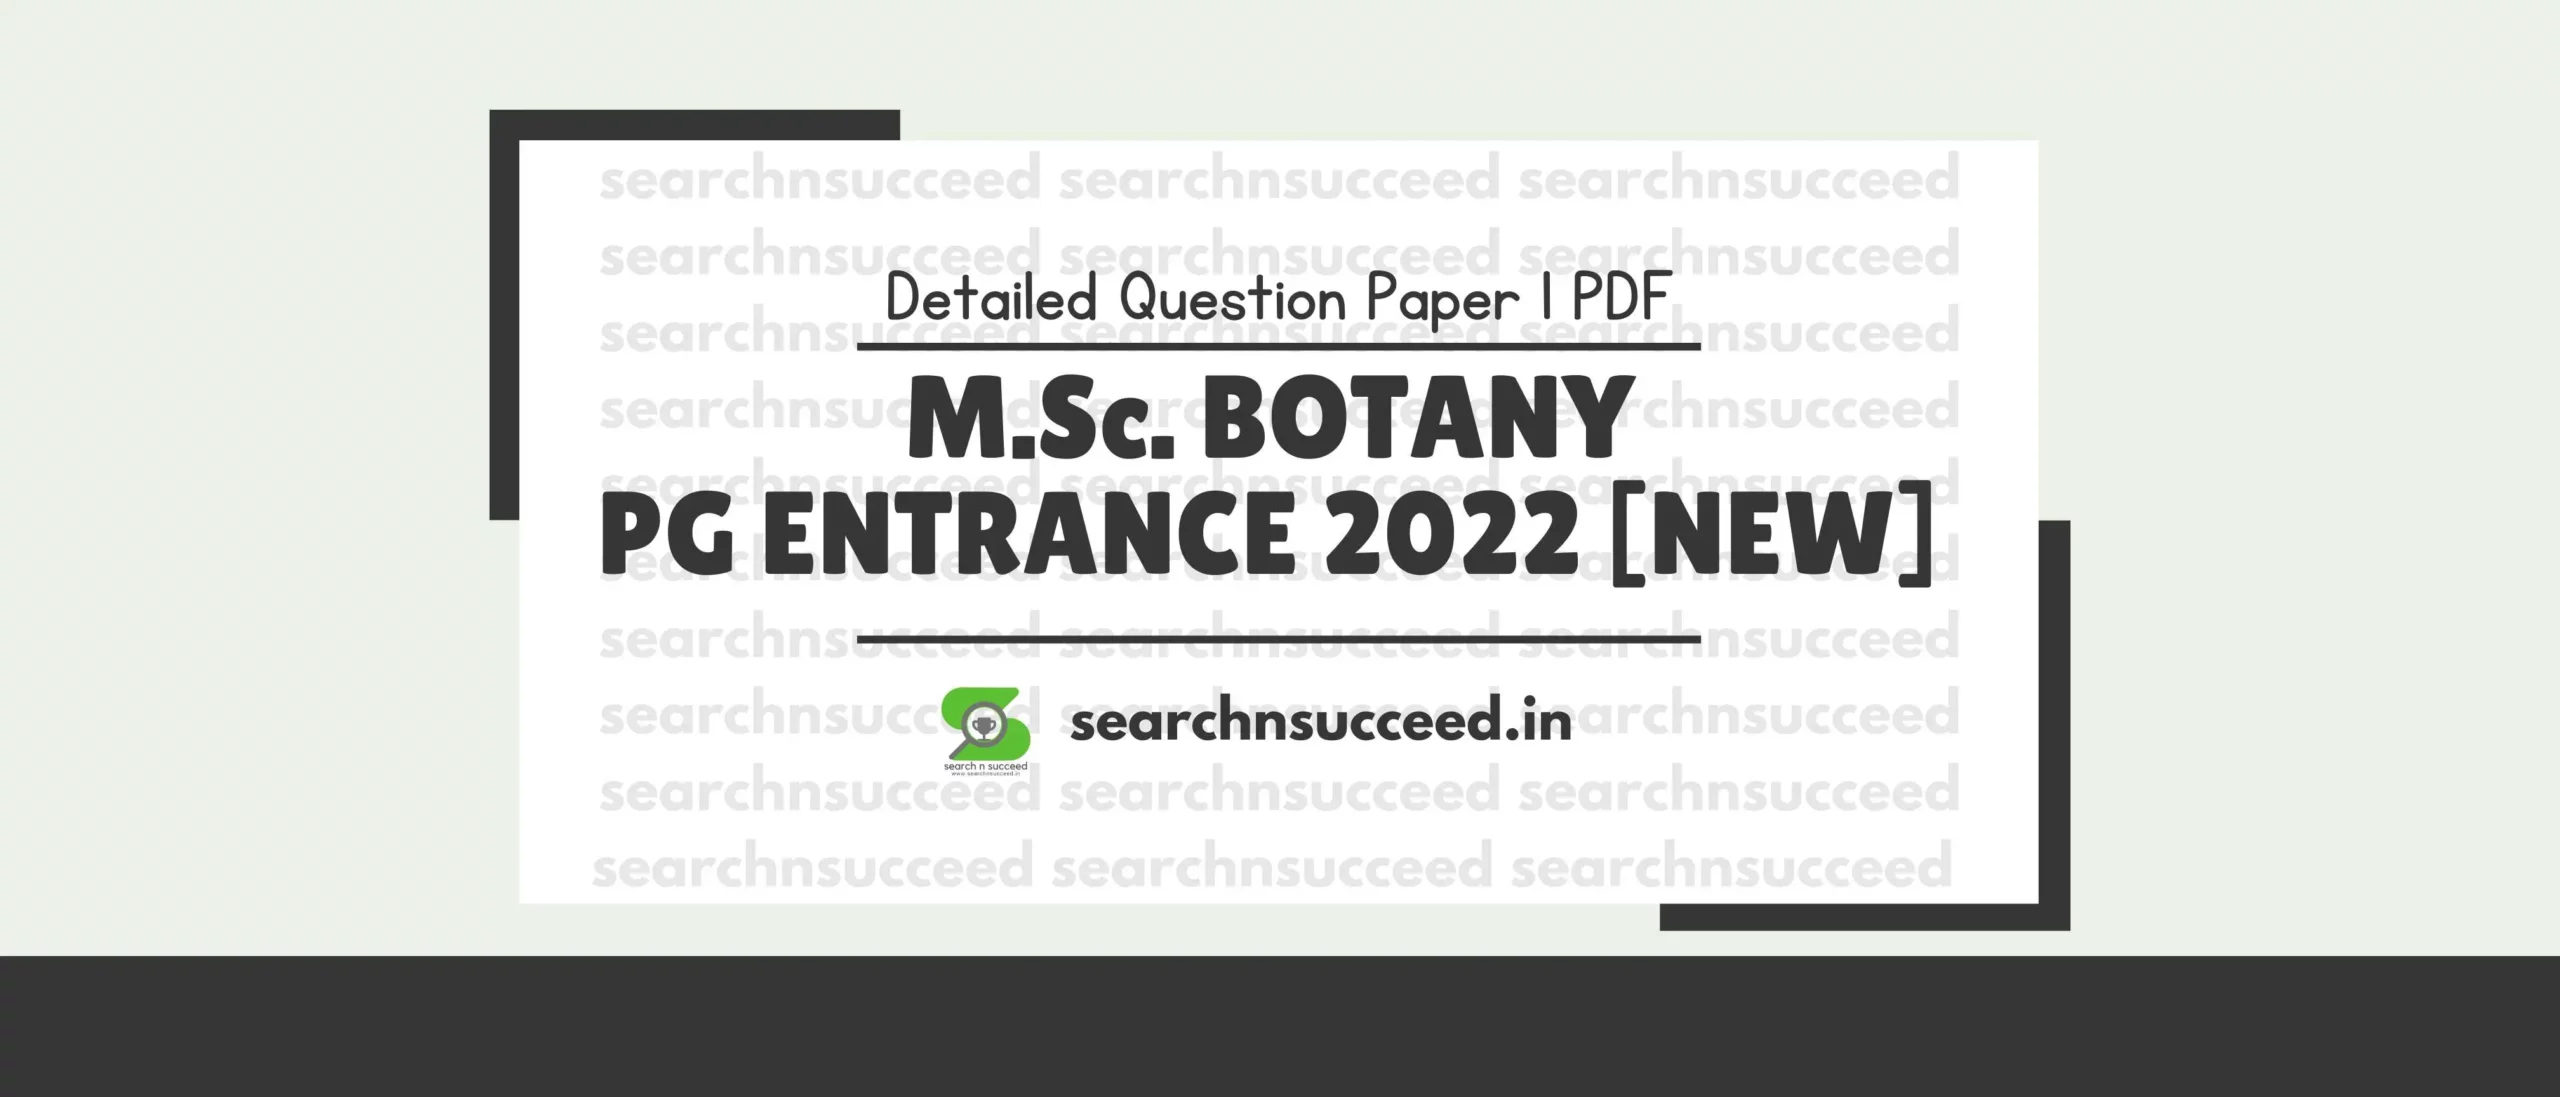 M.Sc. BOTANY PG ENTRANCE 2022 [NEW] – Question Paper PDF with Detailed Key Answers